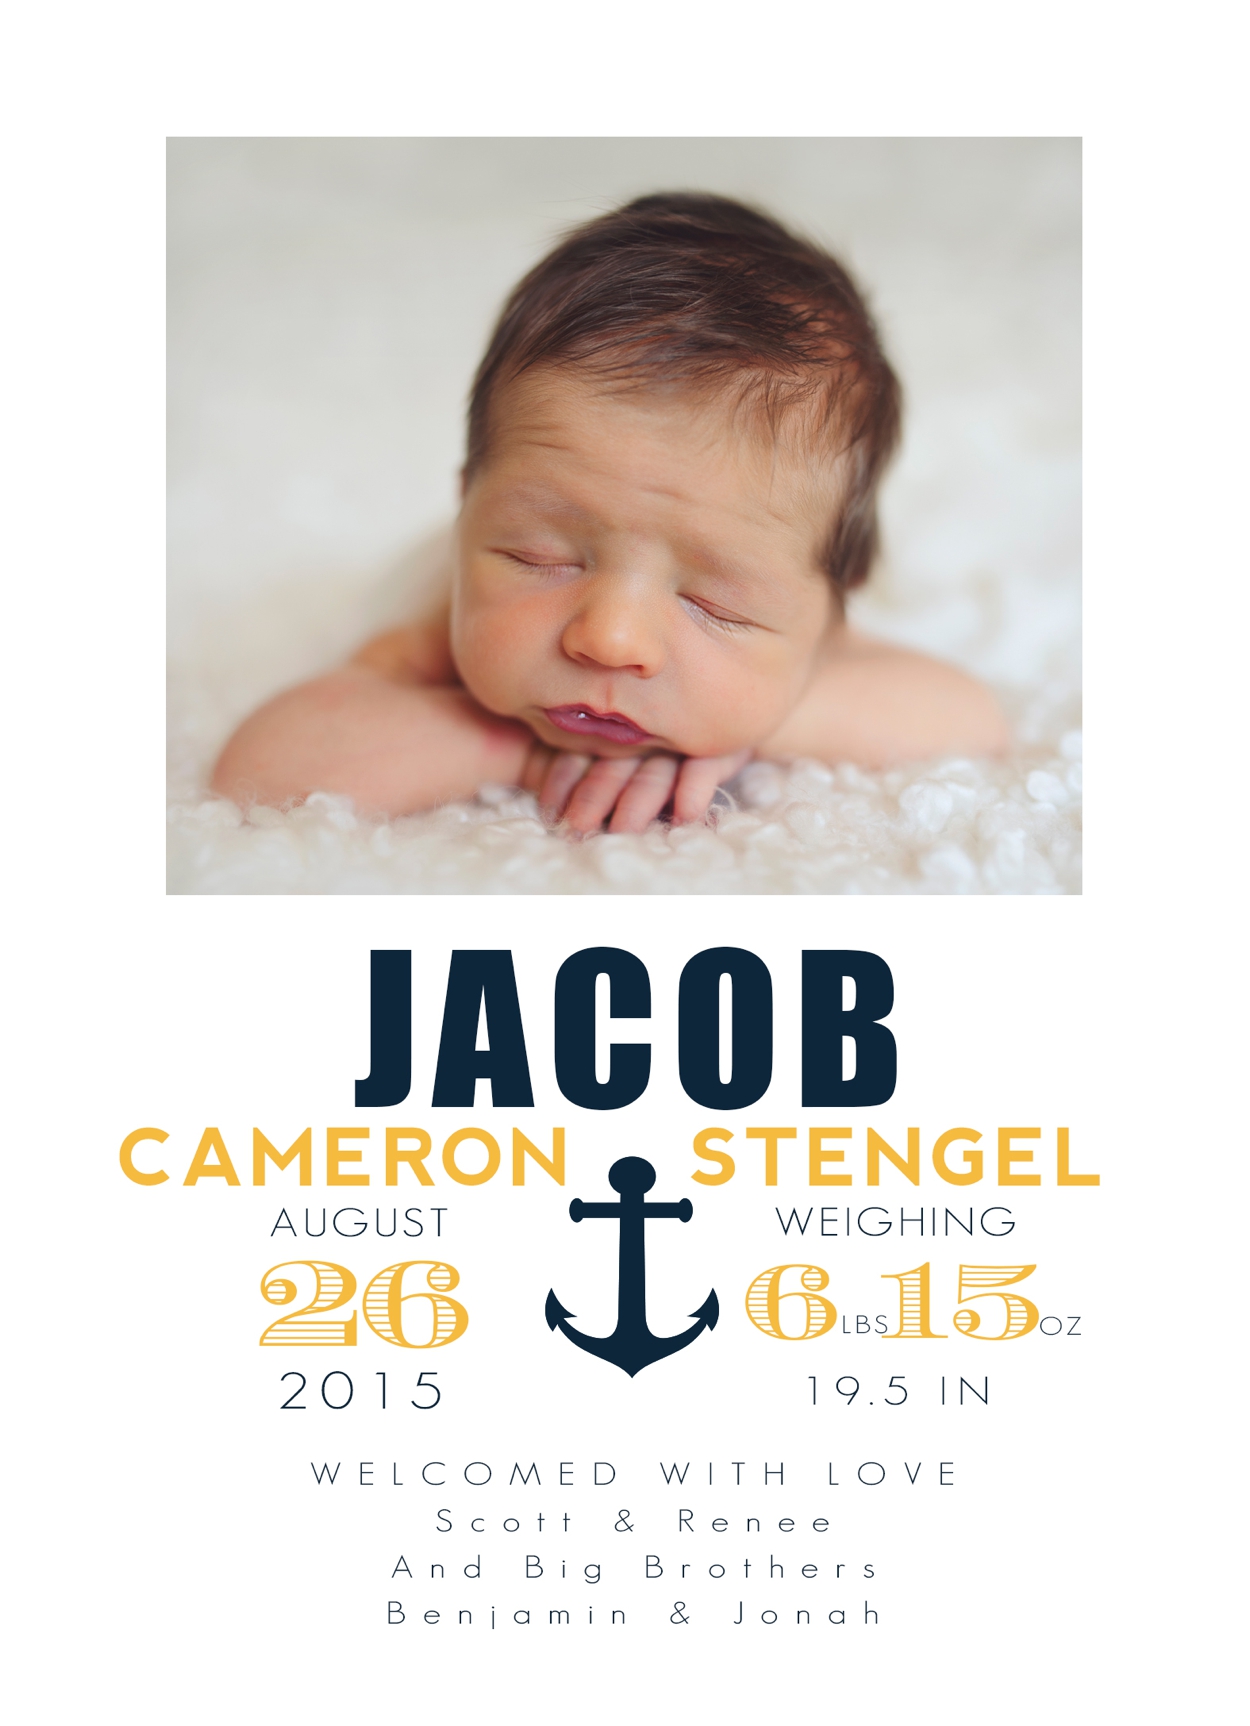 Newborn Nautical Baby Announcement for Jacob with Navy and Gold Anchor from Jamie Schultz Designs ~ Welcomed with Love photographed by RENEE STENGEL Photography | Charlotte Portrait and Underwater Photographer | 